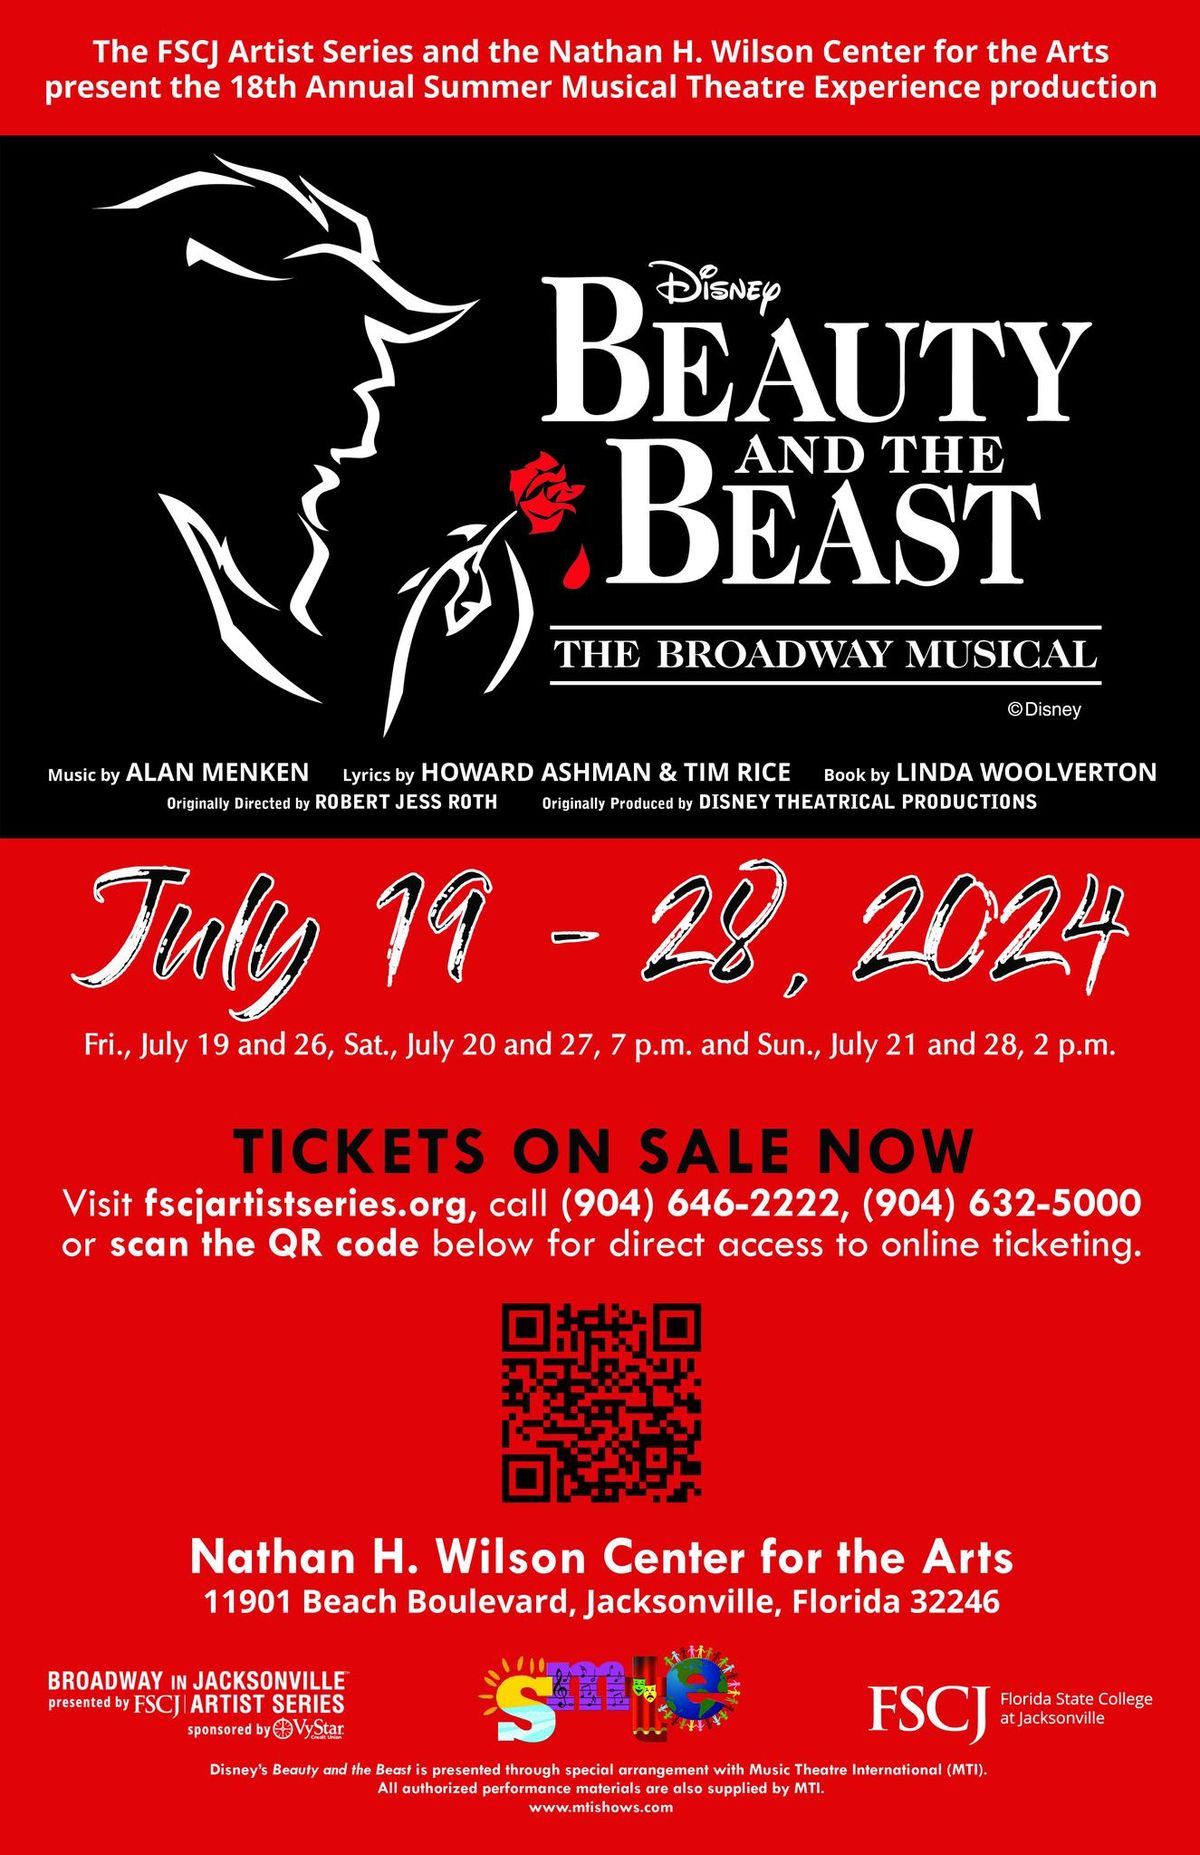 18th Annual SMTE production of Disney's 'Beauty and the Beast'